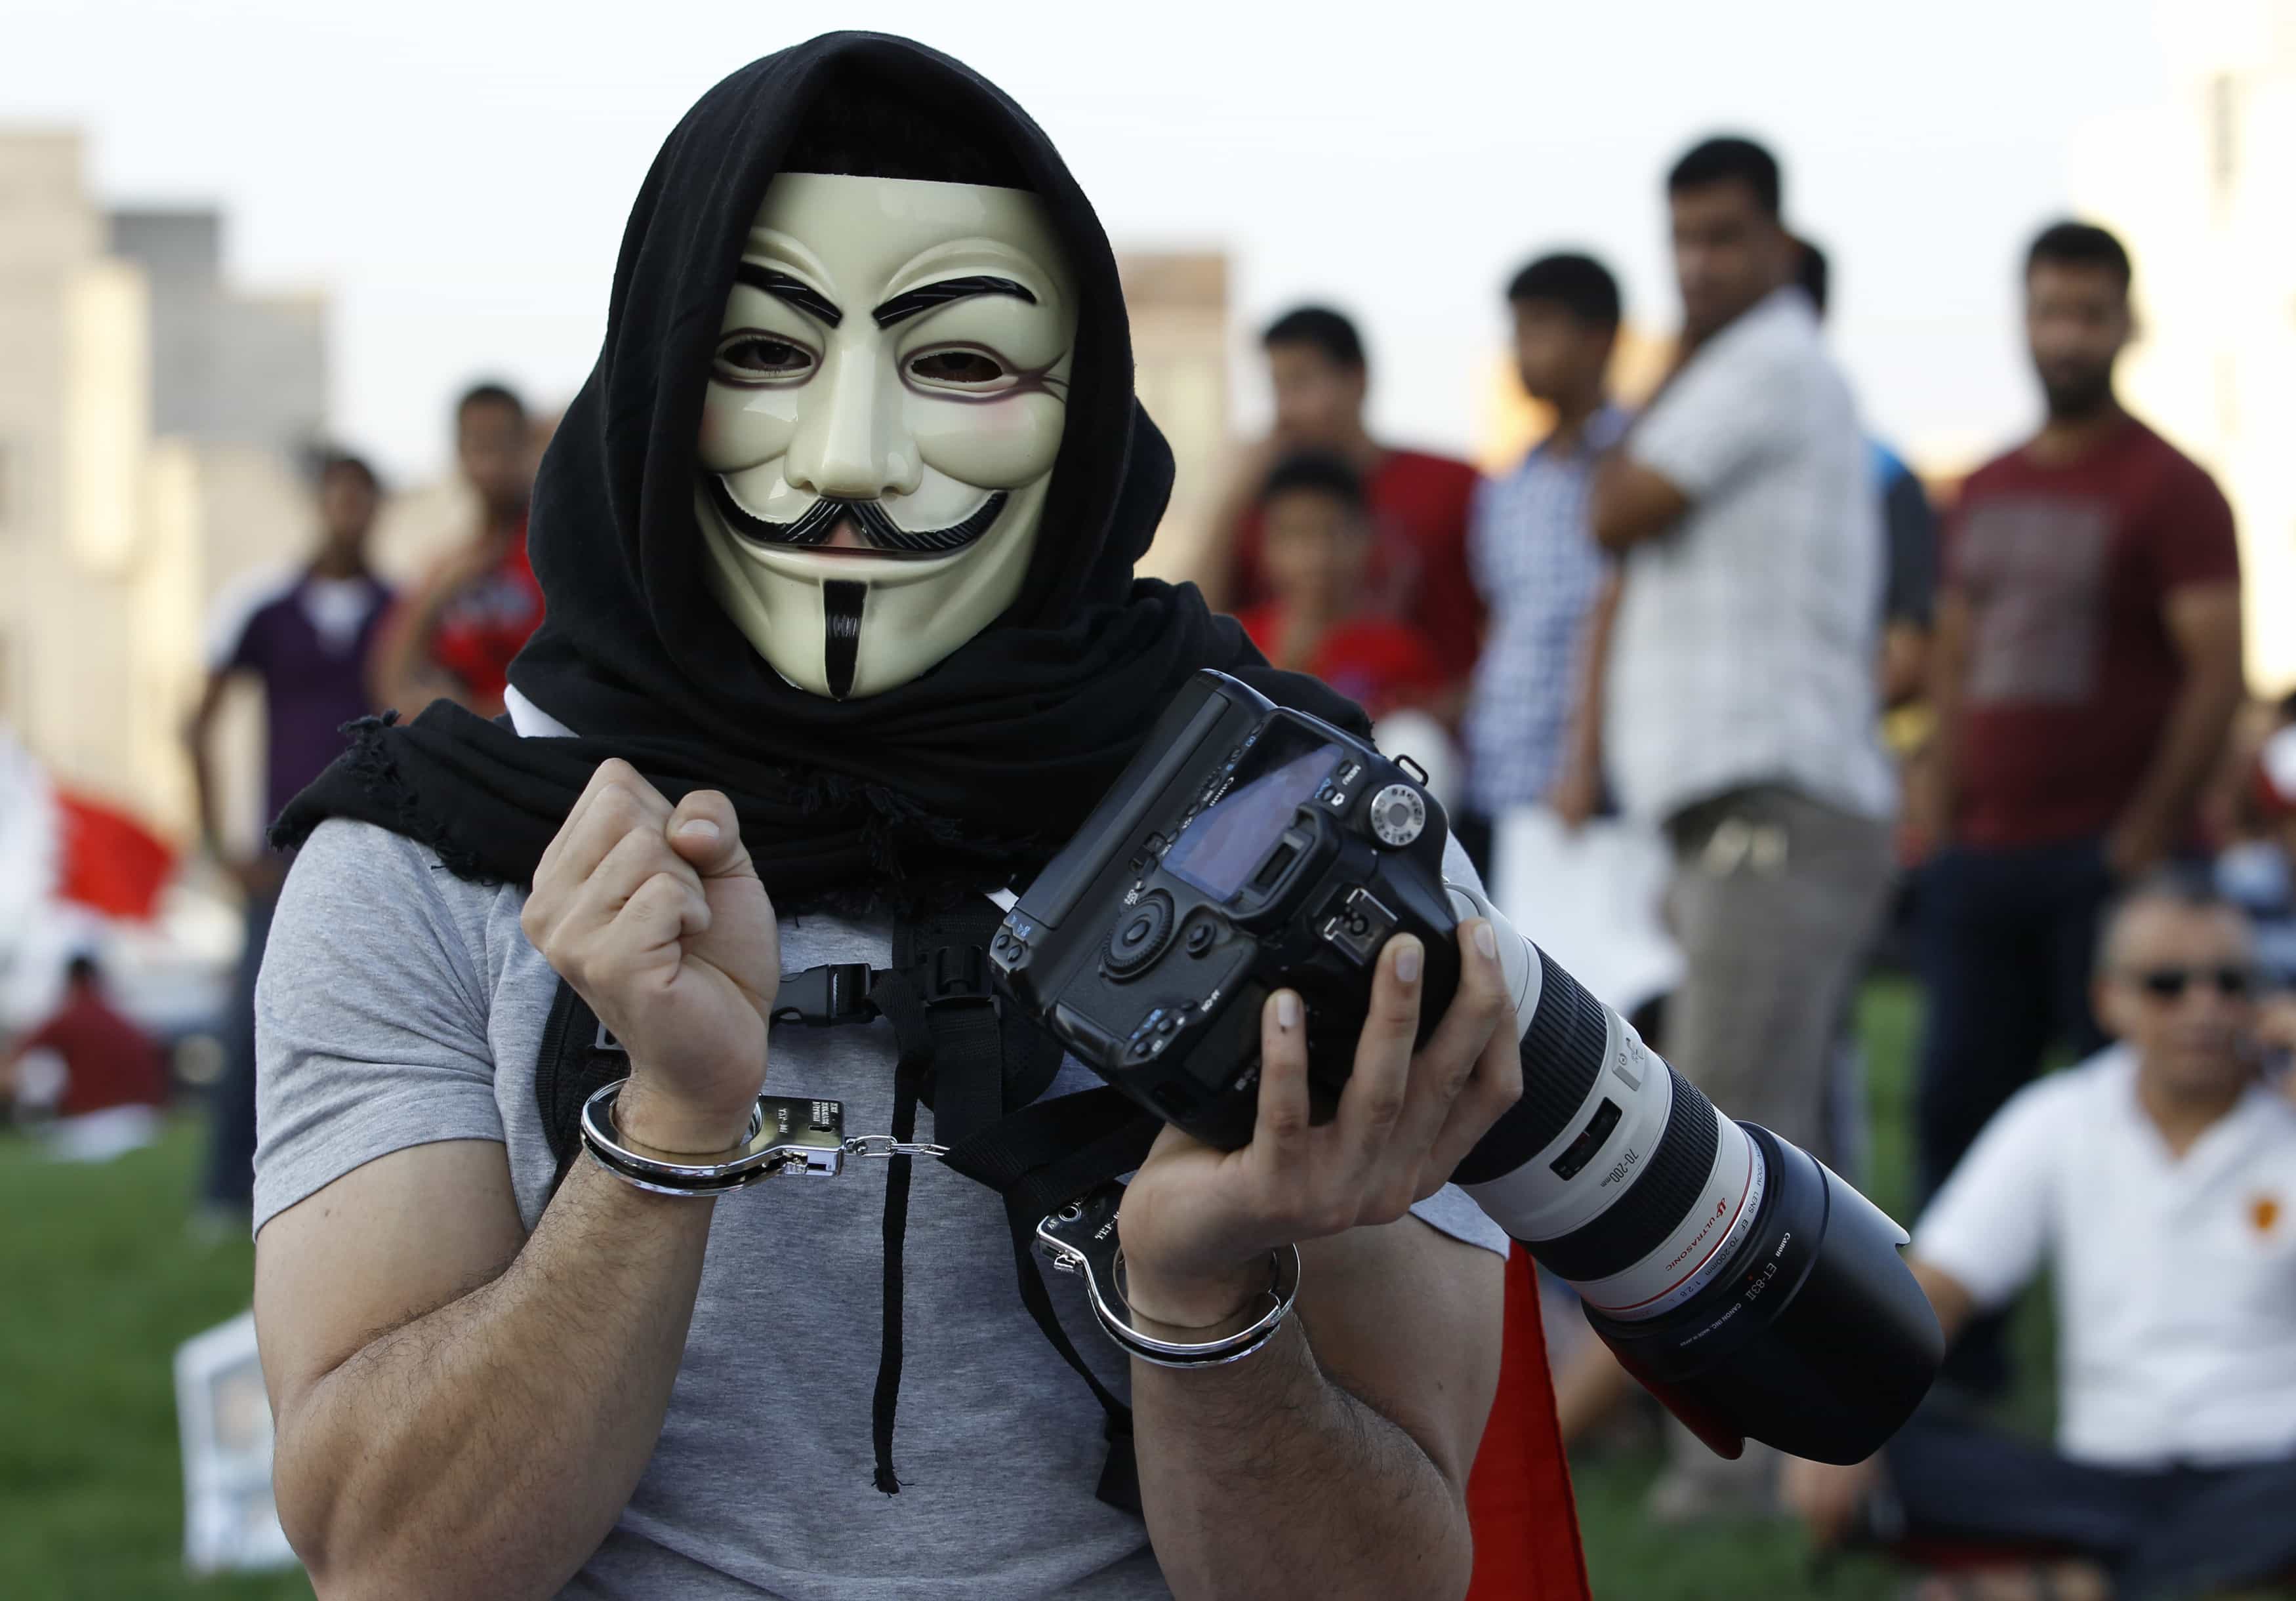 A protester wearing a Guy Fawkes mask poses with a camera with his hands cuffed in a show of support for arrested photographers in Bahrain, REUTERS/Hamad I Mohammed